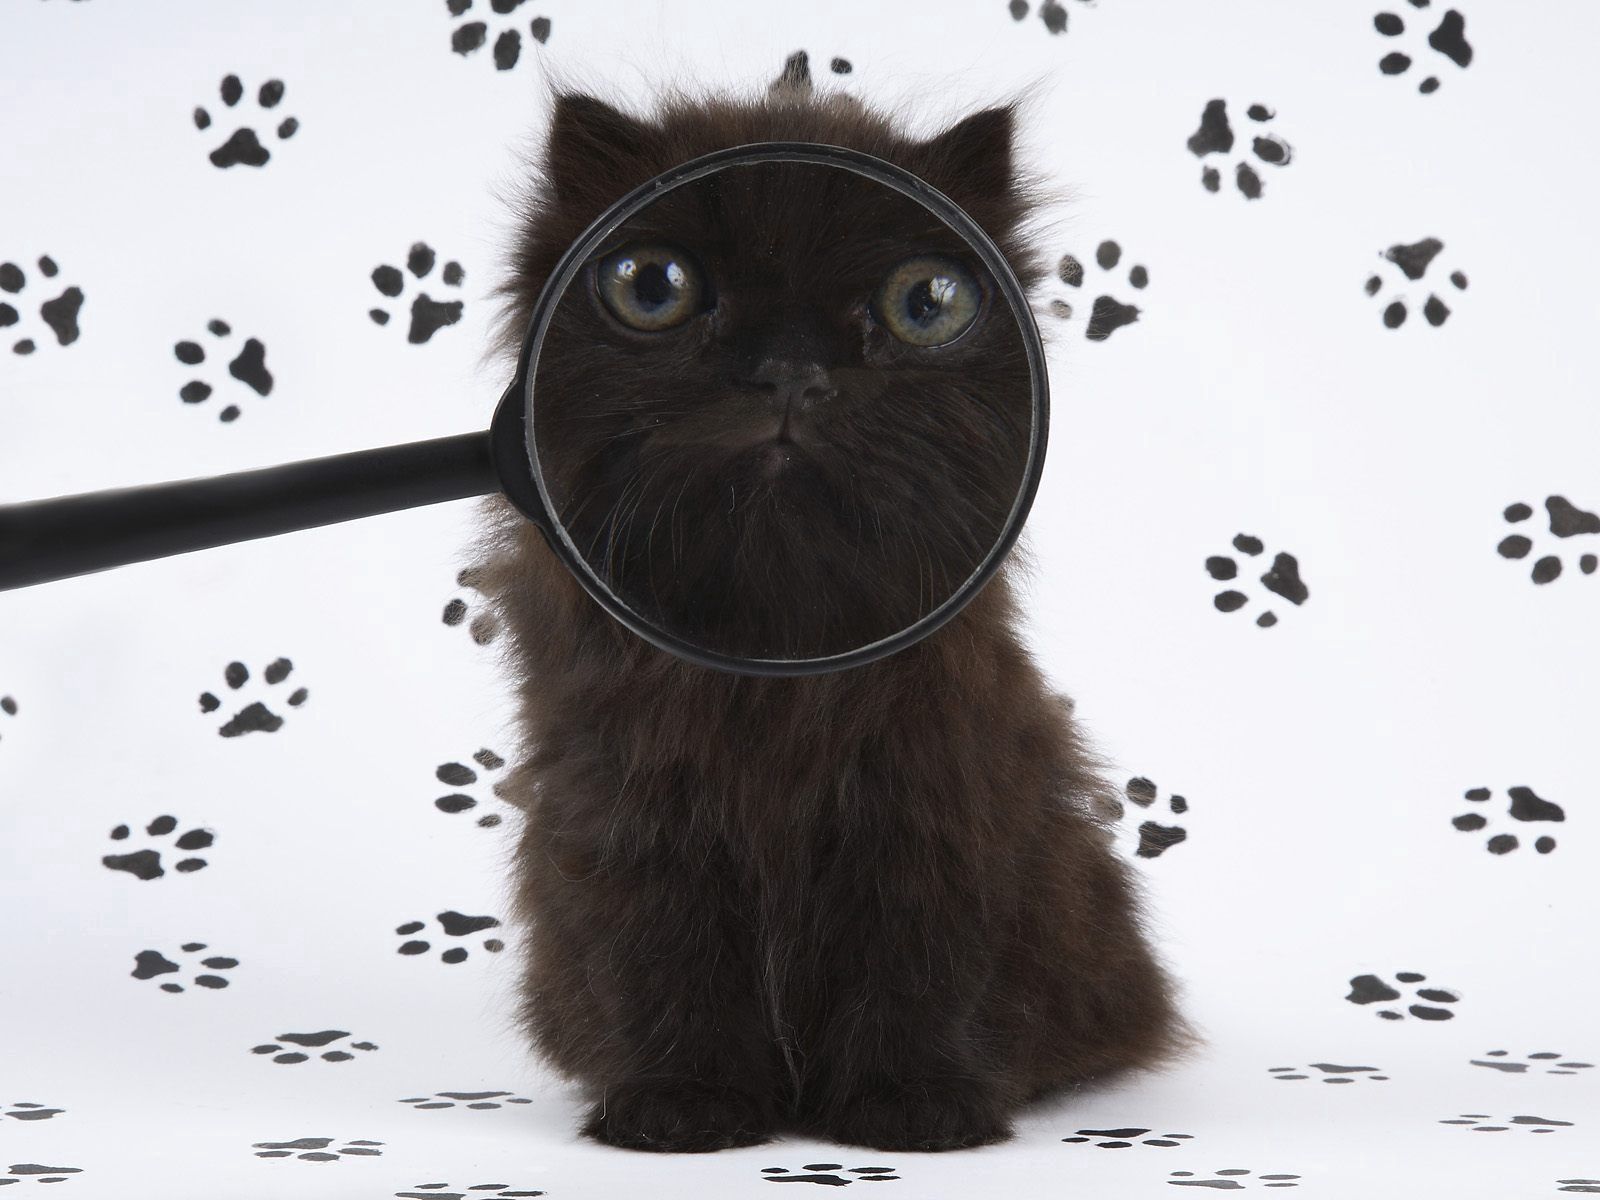 cat, animals, fluffy, muzzle, magnifier Full HD